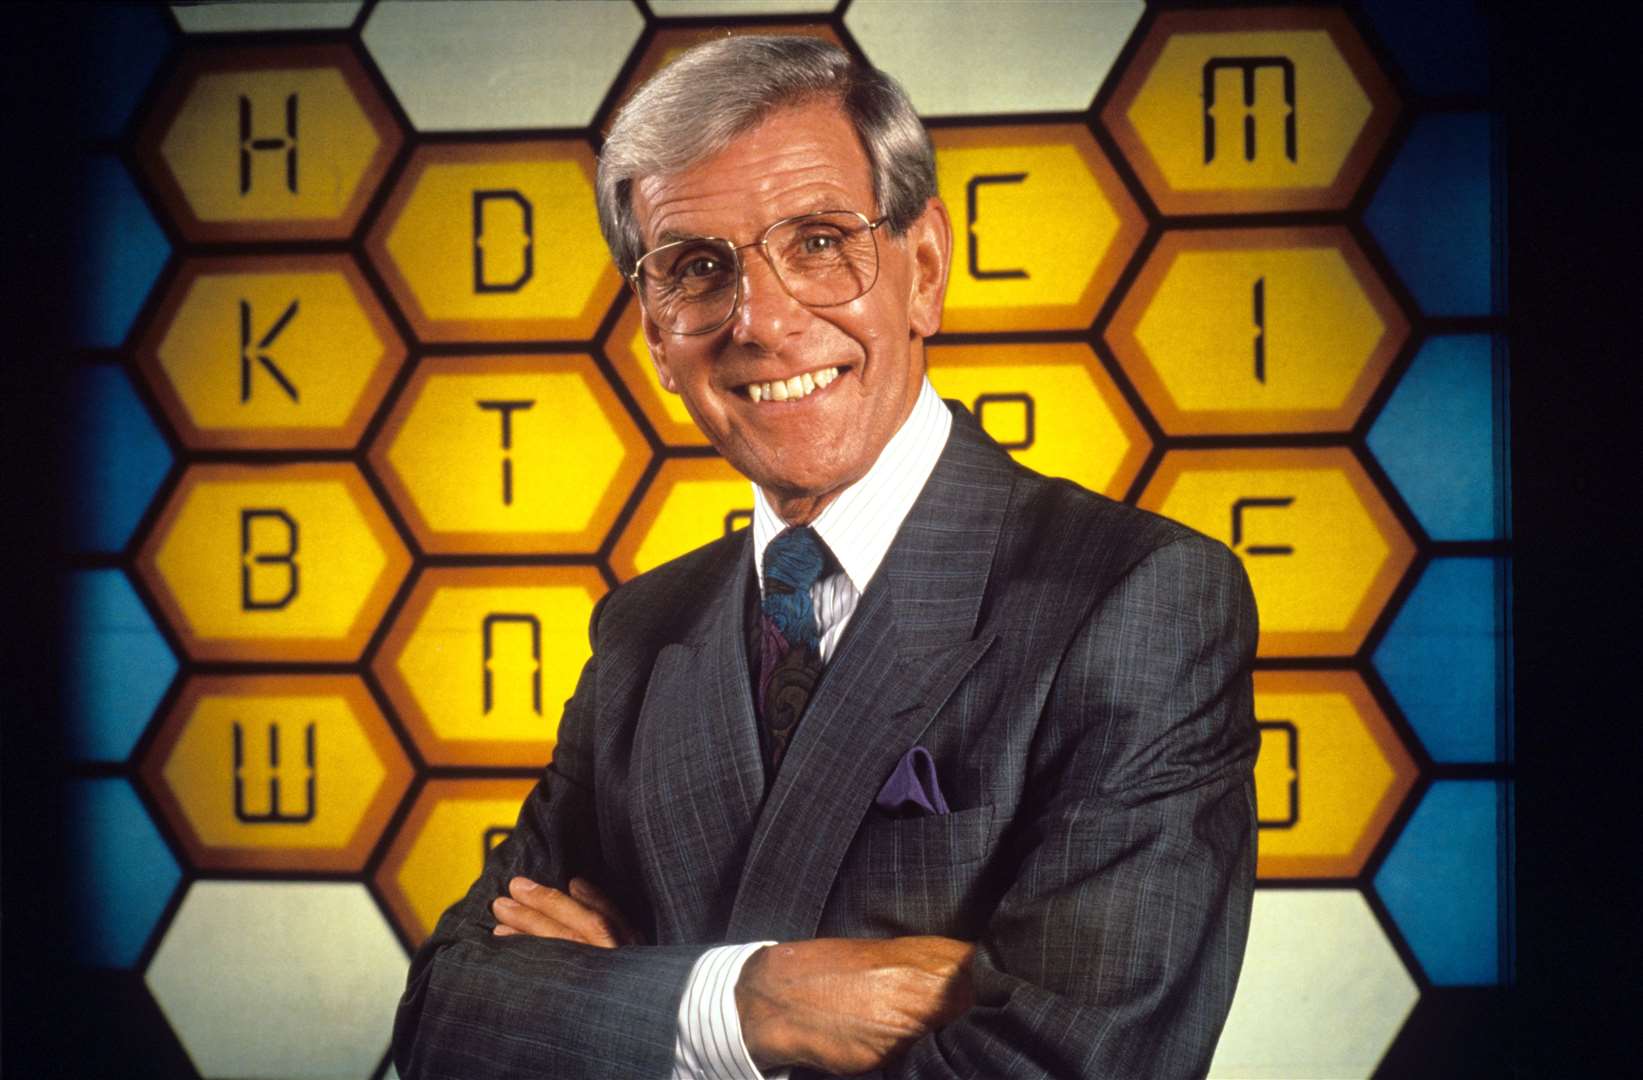 Blockbusters host Bob Holness. Photo by ITV / Rex Features